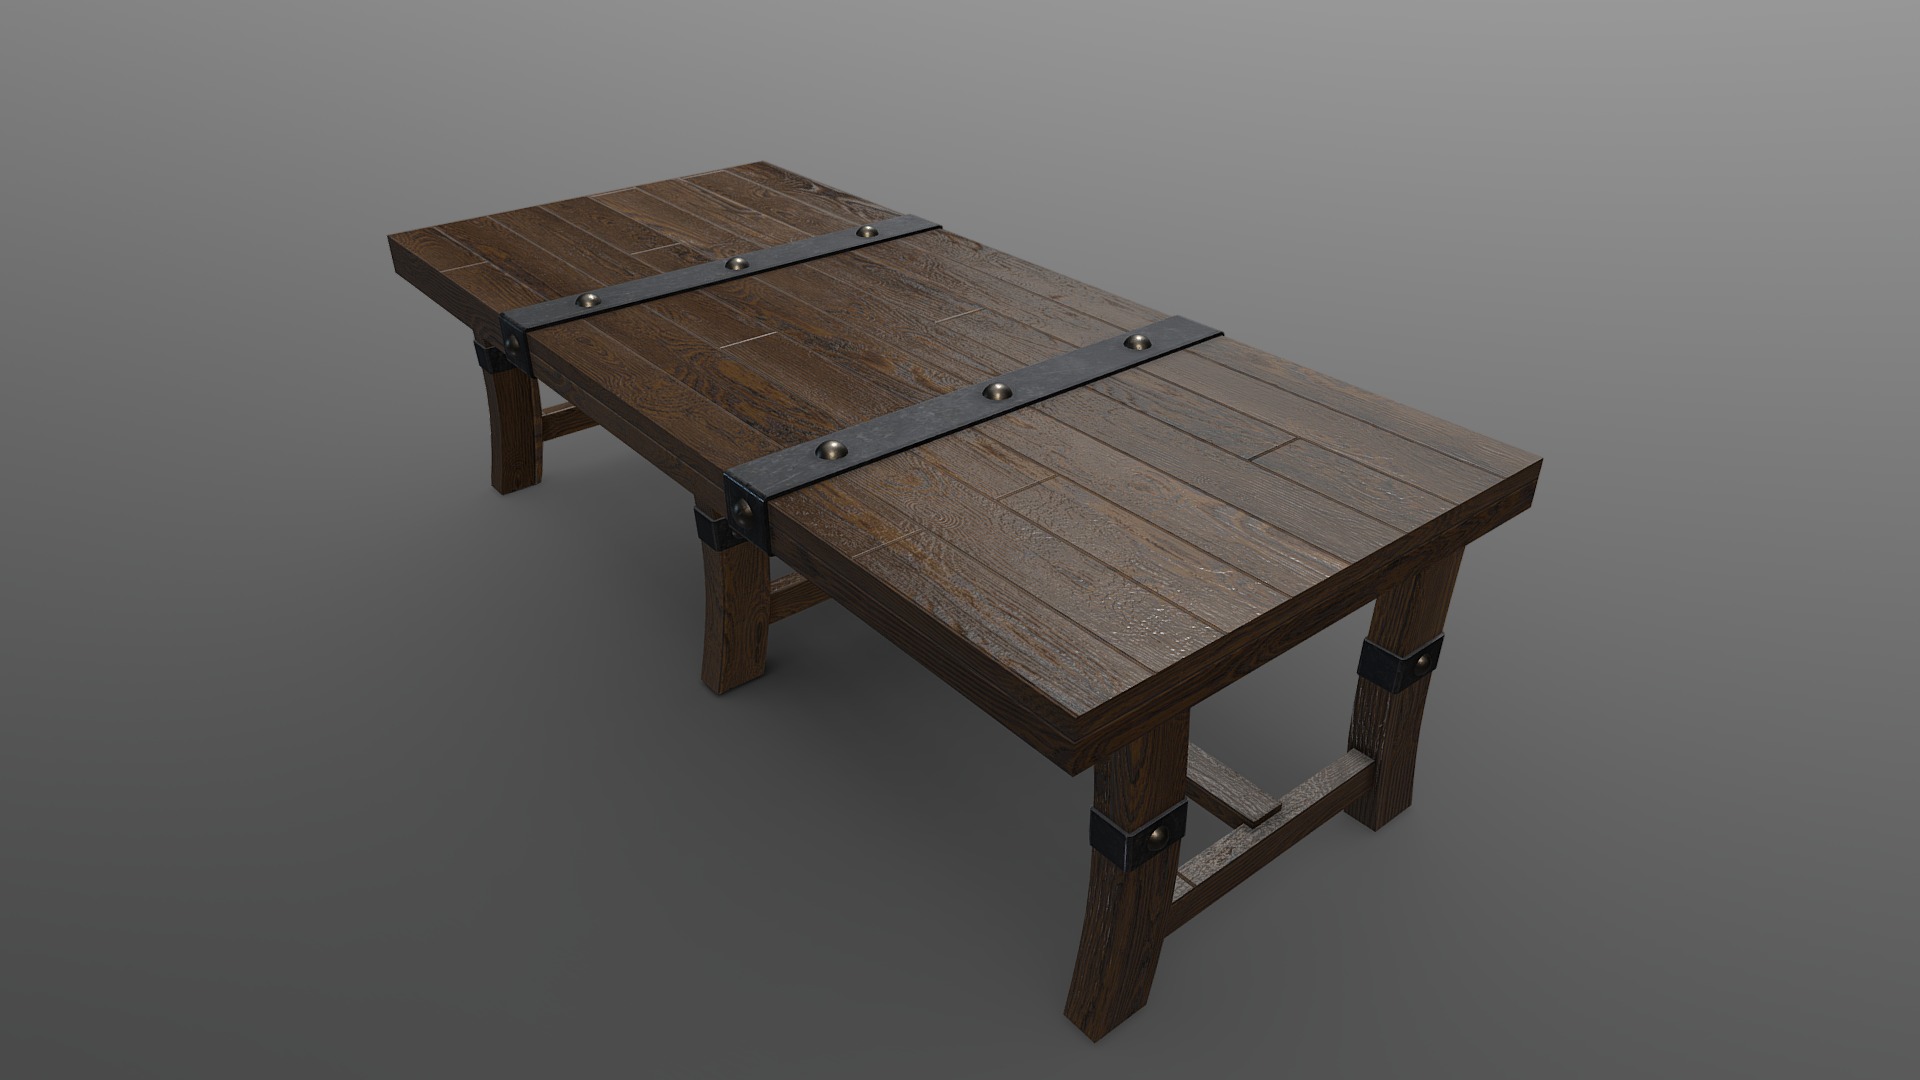 3D model Medieval Table - This is a 3D model of the Medieval Table. The 3D model is about a wooden table with a metal frame.